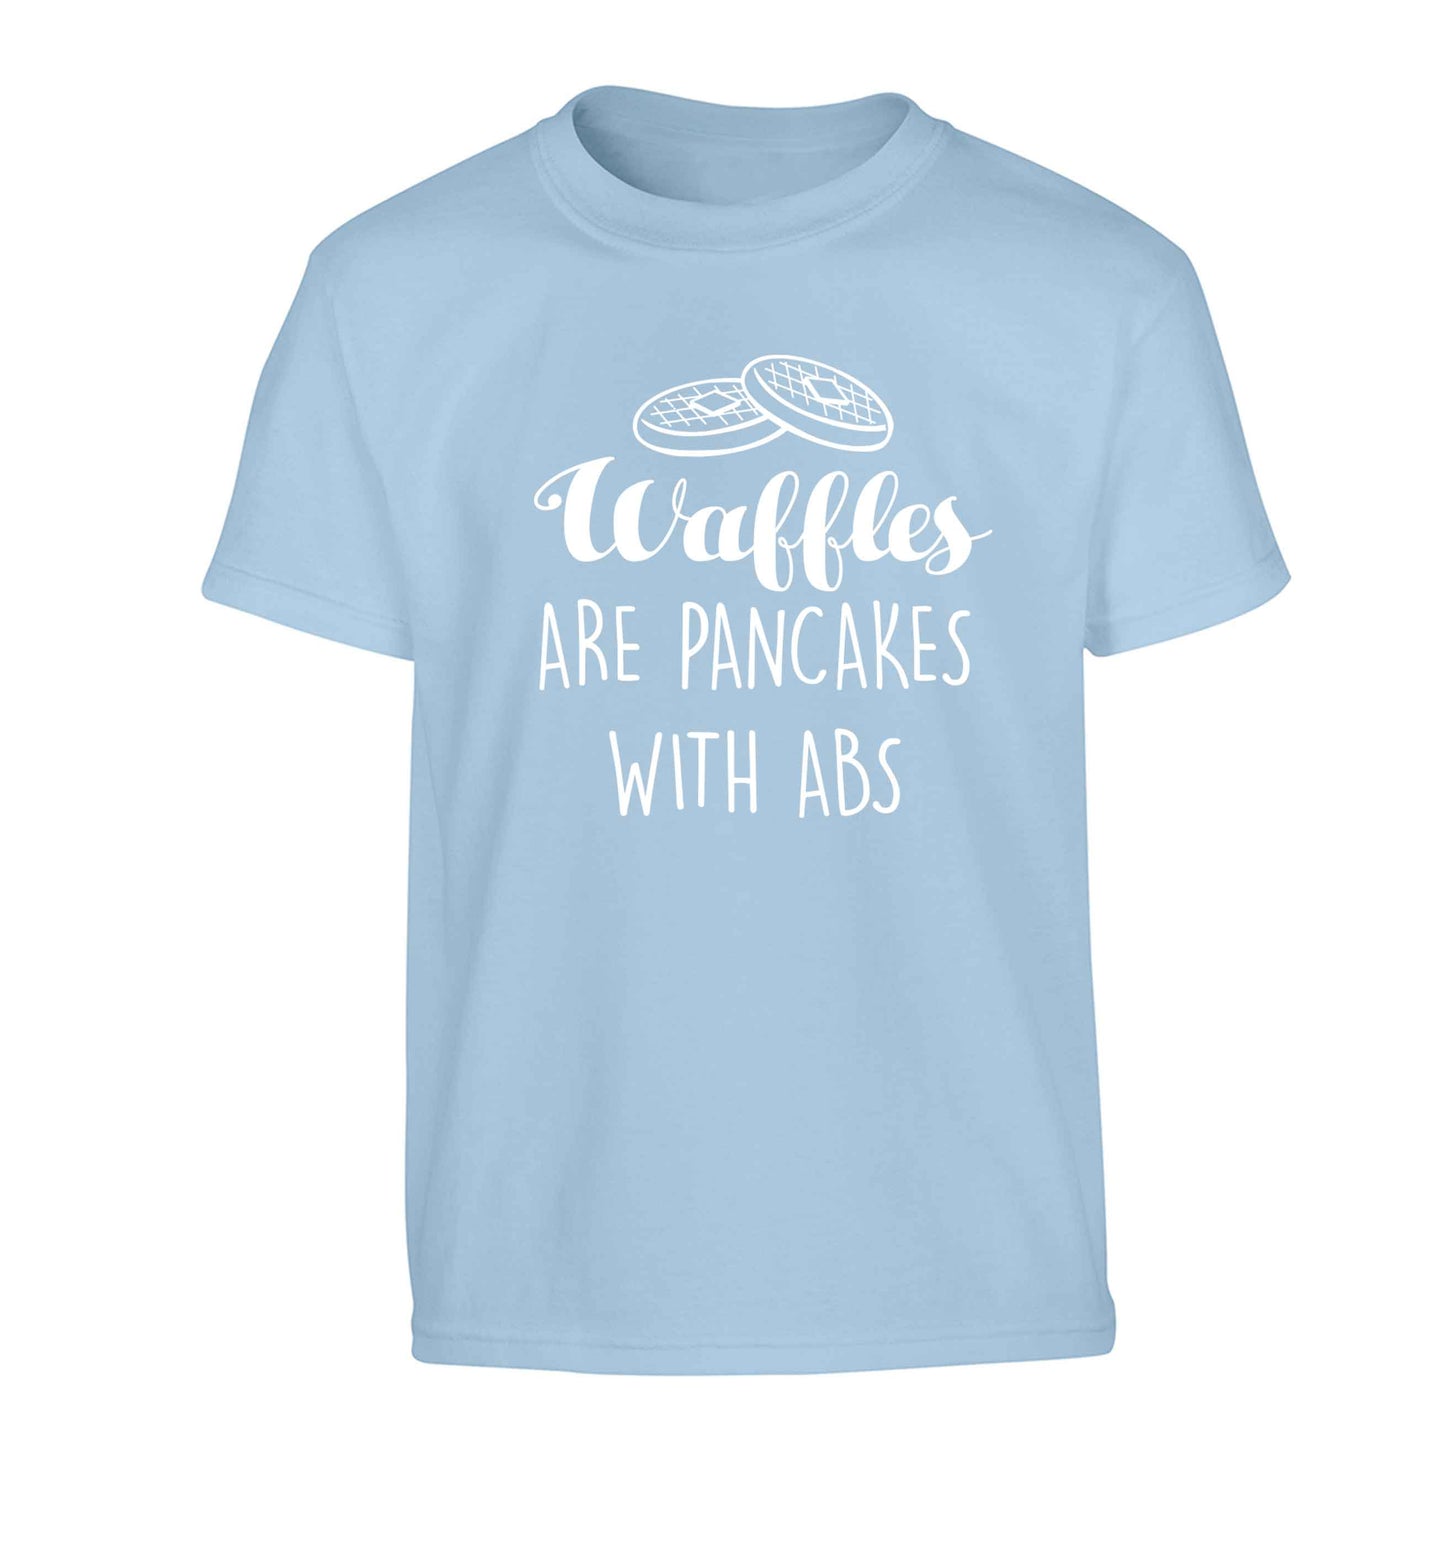 Waffles are just pancakes with abs Children's light blue Tshirt 12-13 Years